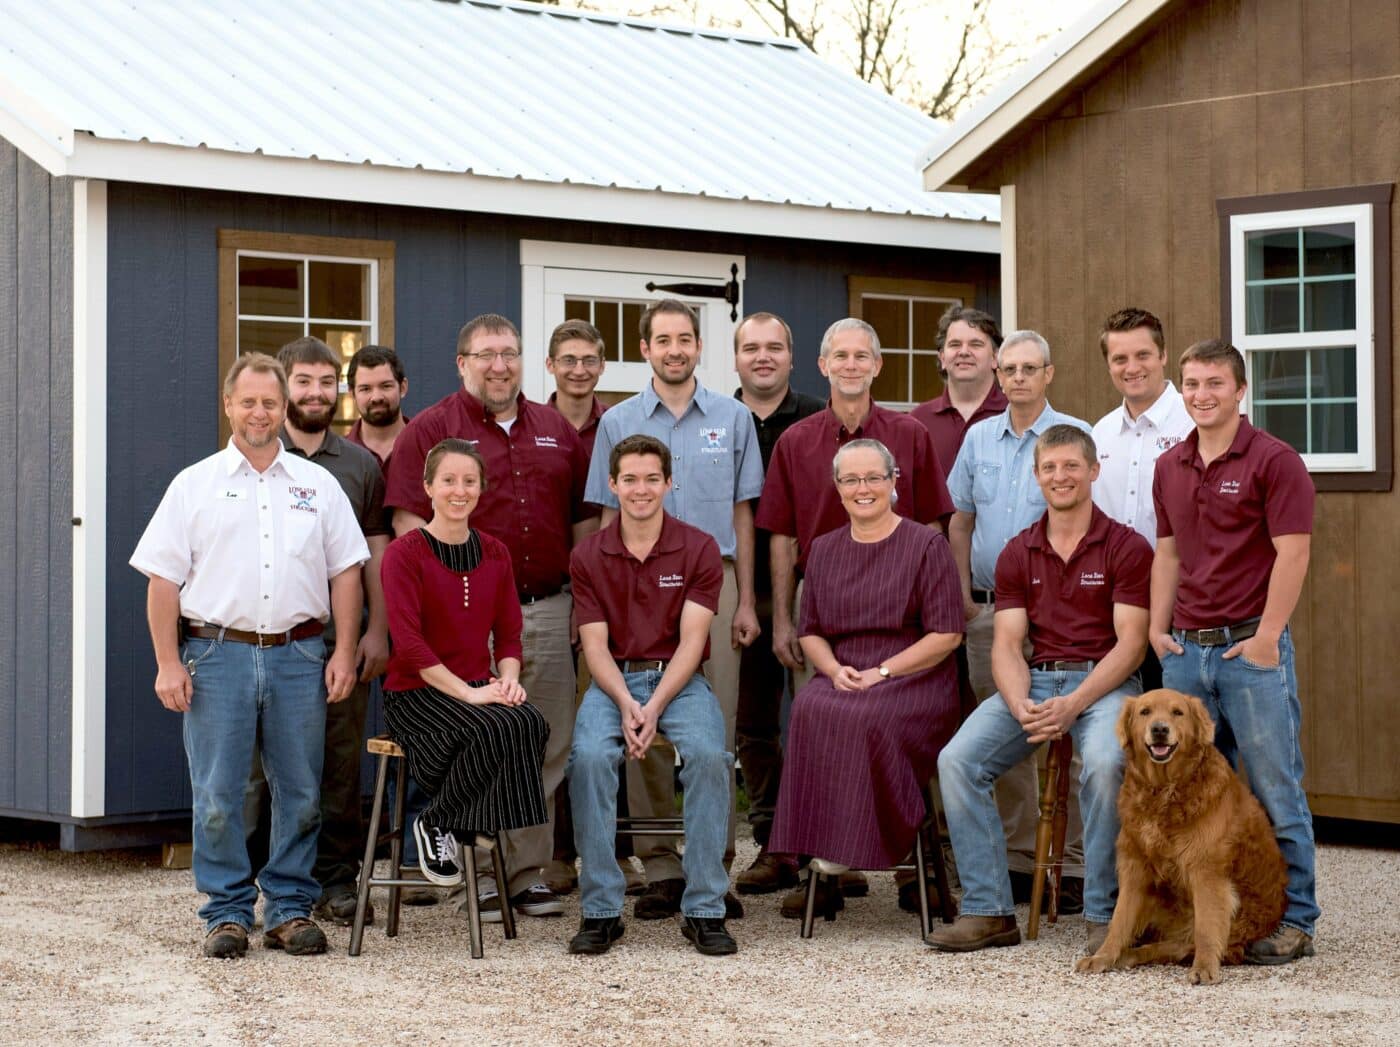 lone star structures employee photo 2019